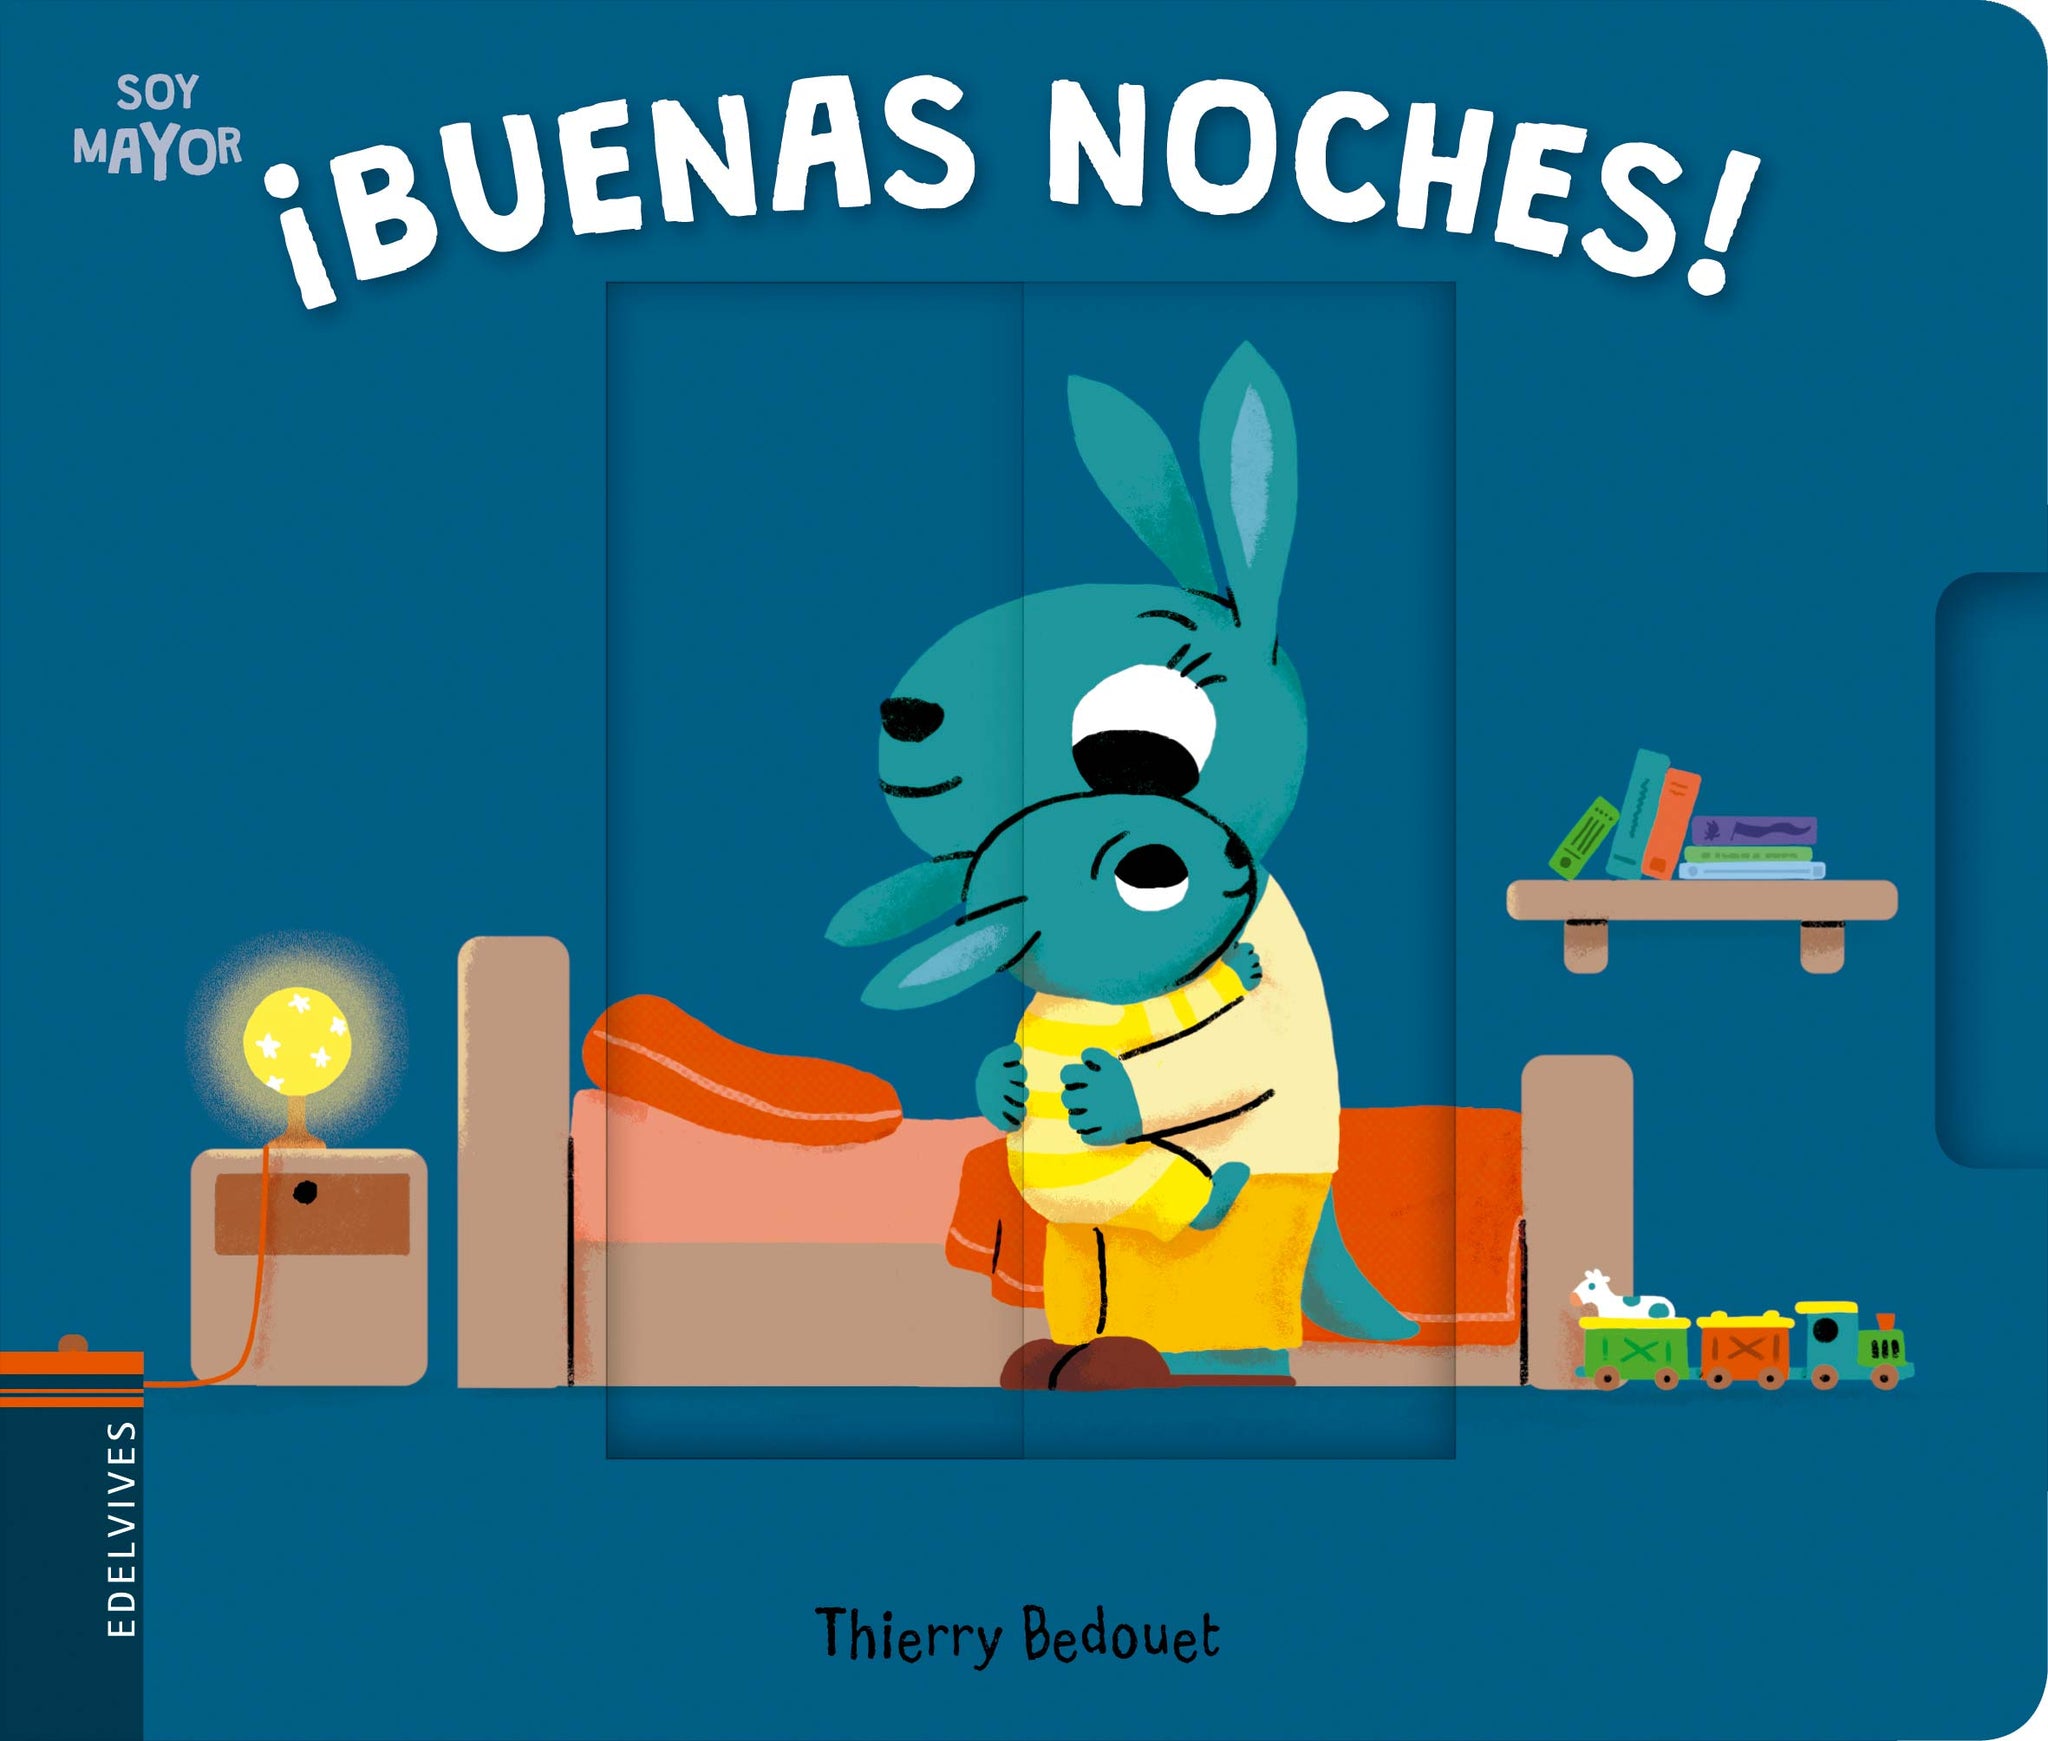 ¡Buenas noches! Autor: Thierry Bedouet